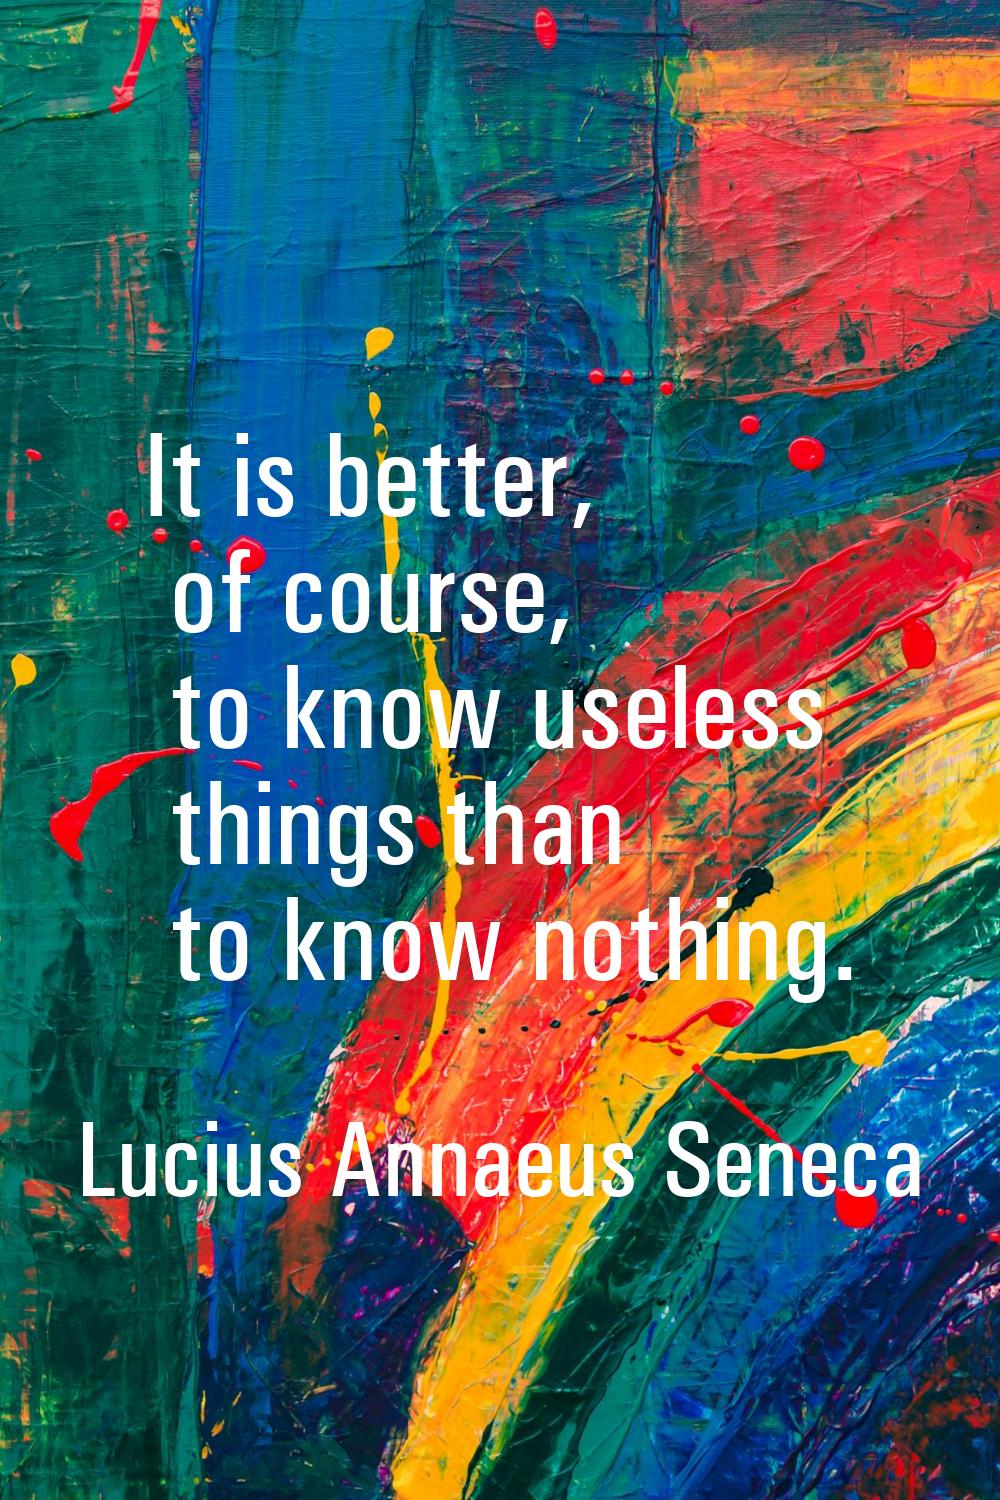 It is better, of course, to know useless things than to know nothing.